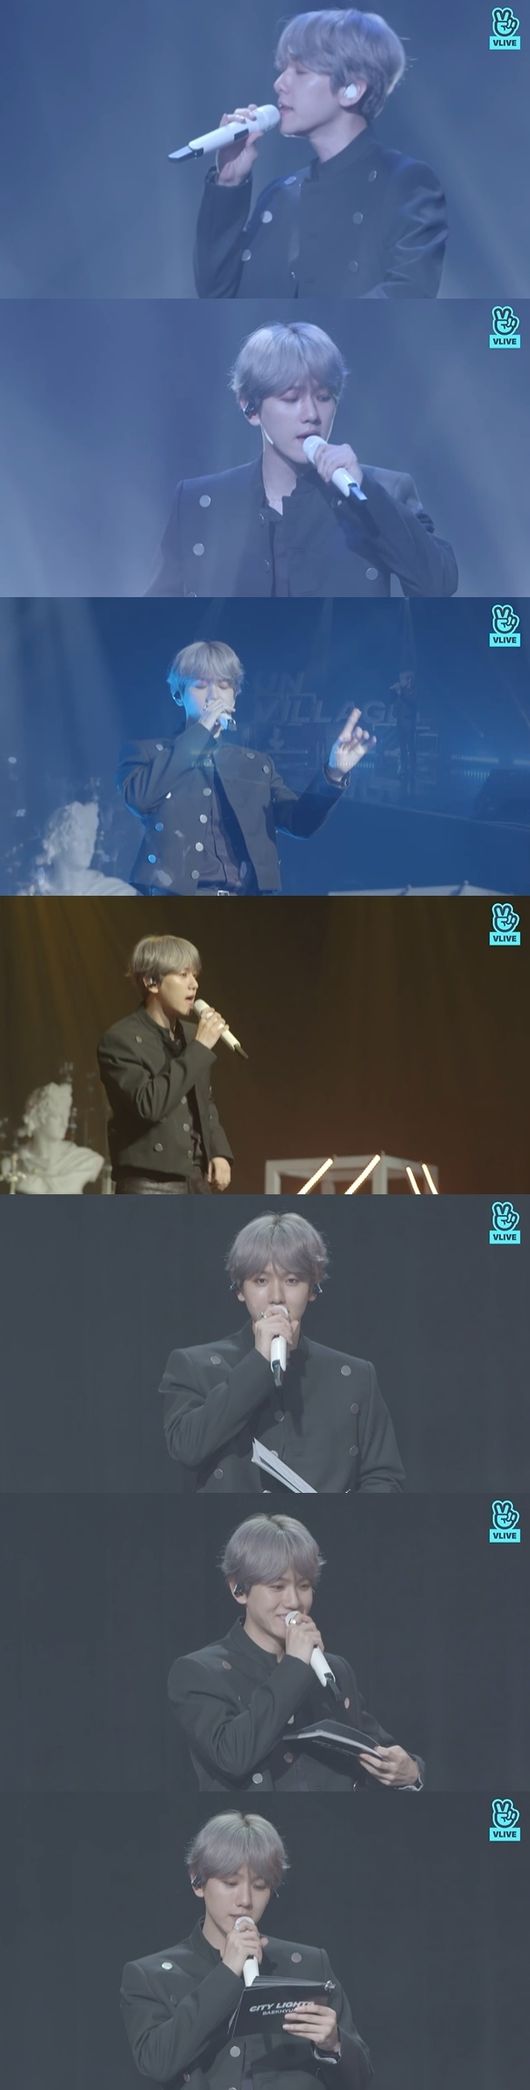 Baekhyun has made a new appearance as a solo singer seven years after his debut.On the afternoon of the 10th, Naver V app released the showcase of Baekhyuns first mini album City Lights.Group EXO Baekhyun turned into a solo singer after seven years, and the title track UN Village (United Nations Village), as well as a total of six songs including Stay Up (stay-up), Betcha (betcha), Ice Queen (Ice Queen), Diamond (diamond), and Psycho (Psycho) The song is included, and you can see Baekhyuns charming vocals and sensual music colors.The title song UN Village is an R & B song that combines groovy beat and string sound. It is a romantic time to look at the moon with a lover on the United Nations Village hill.The solo album recorded a total of 401,545 copies (as of July 8) in the pre-order volume alone, and once again confirmed the power of Baekhyuns power by breaking 400,000 copies.It is Baekhyun who debuts as a solo singer. It was a very nervous place because it was the first time as a solo singer, not EXO.But when the song starts, the tremor disappears and it is comfortable as if it came home because it is in front of EXOel. In addition to you here, many fans are watching V live live broadcasts. I hope those who are watching the broadcast will send a lot of cheers and hearts.Two hours ago, at 6 p.m., the sound source was released. How did you hear it? What song was good? I prepared a lot while thinking about you.The title song United Nations Village is something you didnt normally show. Thank you for loving that. In addition, Baekhyun said, Today, I want to see a lot of members because I am doing the showcase alone without members. When I was with the members, I played a licorice role by throwing a word, but I feel different.I heard two songs in front of me, and I was worried about what songs I would do when I was doing Showcase.I wanted to hear the brightest song of my album, Betcha, and my personal favorite, Ice Queen. Theres a conflicting image.I think I like Betcha when I see the reaction. Baekhyun prepared the album unboxing time for his fans and said, Its time to tell you everything about the mini album, the first corner I ambitiously prepared.Baekhyun, who took out the photo card, read the message behind it, saying, I am your new rookie, Baekhyun.Baekhyun said: When I was filming the Day version, I went up on the roof too, I had a fear of heights and I couldnt move more than three steps.The day version was taken a lot during the day, but its not fun to show it all, so its more meaningful to take one of the real things yourself.Its Feelings in a languid afternoon with the whole image, he explained.Taking up the night version, Baekhyun said: The photo card was taken at 3am, and many people waited for the solo album, so you can take it without a circle and watch it wear out.There are a lot of photos with sexy added, he said. I like the number of hearts has exceeded 100 million now. I hope this album will make you 24 hours happy.During the album preview time, I freely talked about the album work process, favorite lyrics, and music.Baekhyun said: Stay Up seems to be even better because my voice and rapper Mr. Binzinos voice are so well suited; Betcha felt good with me when I first heard it.I also finished recording quickly while listening to praise from Kenji. In the corner that answers the fans questions, they attracted attention with honest answers.I was wondering about the first thought when I heard the title of the title song. I thought about the United Nations Village neighborhood in Hannam-dong, but unlike what I have heard so far, there are fantasy Feelings.When I showed it to solo, I felt that there were new Feelings, so it was fresh and good. When asked, Whats the difference between Real Baekhyun and EXO Baekhyun?, Im actually almost the same, really similar.The difference is Did you make up or not? And Did you get Mike or not? The difference is that the radius of activity is different.In reality, it is almost home, and EXO Baekhyun is going back and forth around the world. It is a little different. As for the reaction of the members who heard this solo album, Baekhyun said, As soon as I heard the music, I wrote to the group room.I thought I would do ballads, but I broke my expectations and said that it was amazing to have a R & B genre. If the number of hearts has exceeded 200 million now, said Baekhyun, if you are in the top spot, the pledge will be secretly carried out and secretly done.I will do what you will be satisfied with, you do not have to worry about it, he added.Finally, Baekhyun, who gave the title song UN Village, said, I think it is time to return happiness to everyone who has loved me, who has waited so far while soloing this time.I will show you a lot of good looks. Baekhyun City Lights Showcase screen capture